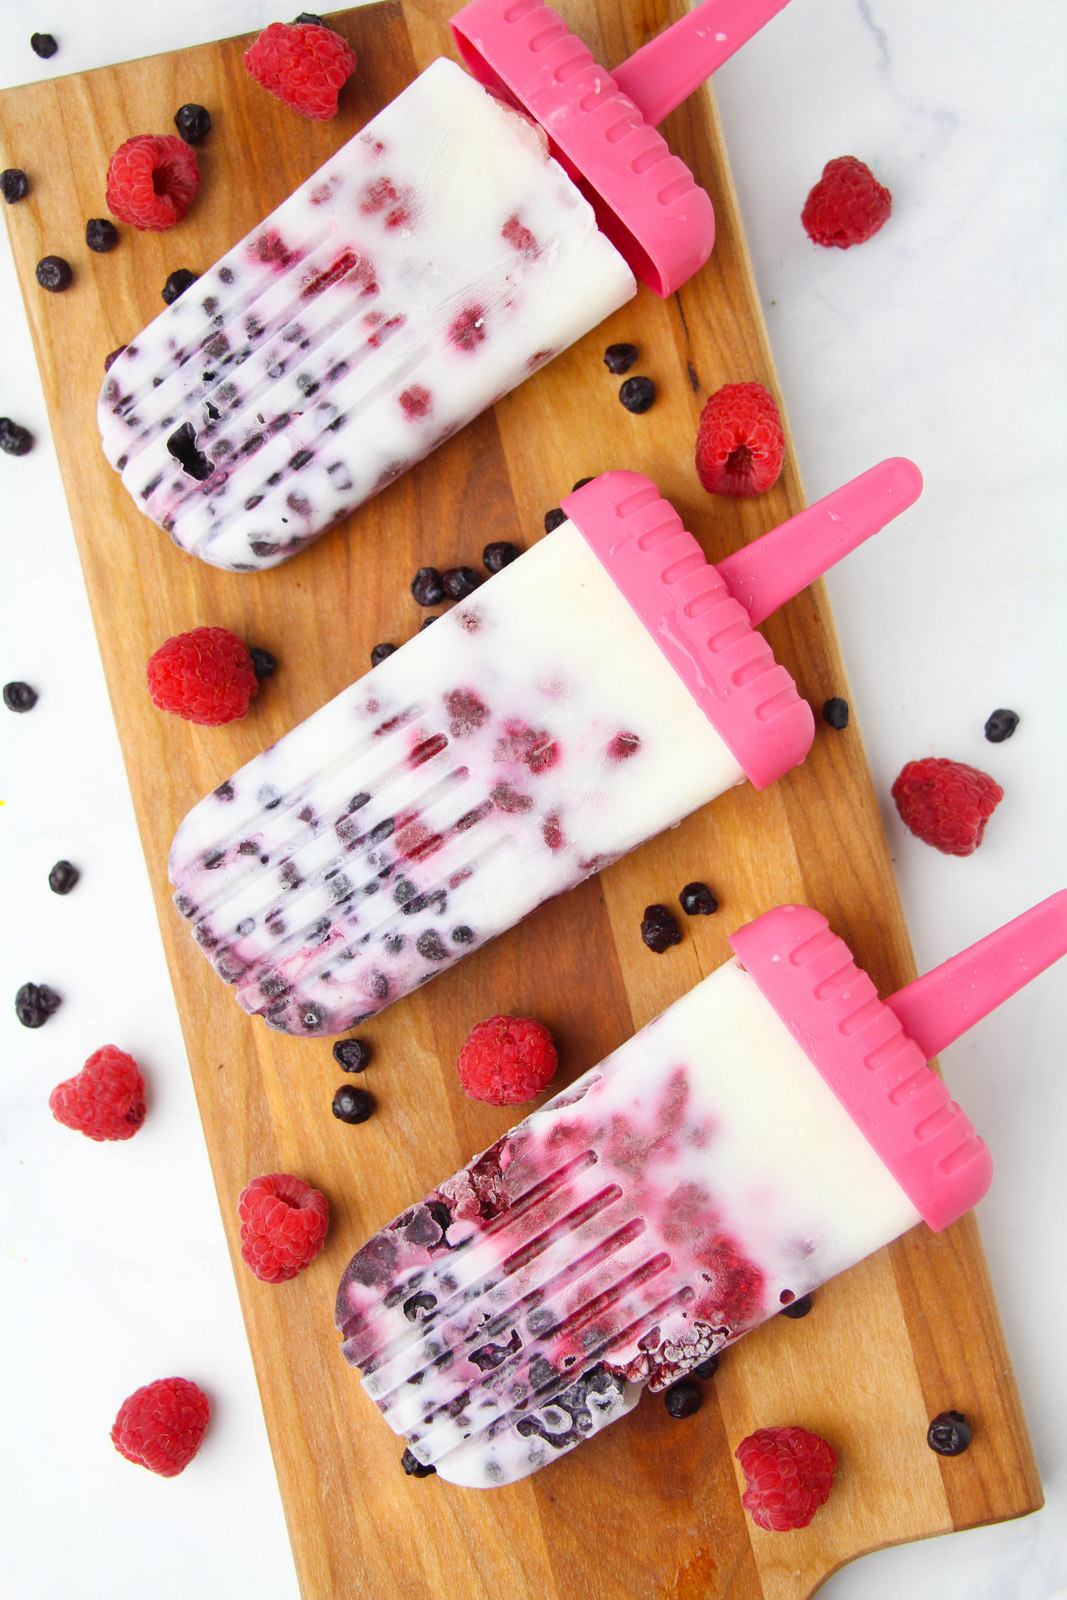 Welcome to Pretty Pintastic Party #165 & my favorite from last week, a Patriotic Fruit Popsicle recipe. You can get the recipe over at Sandy A La Mode, it's an easy, healthier way to enjoy frozen treats.